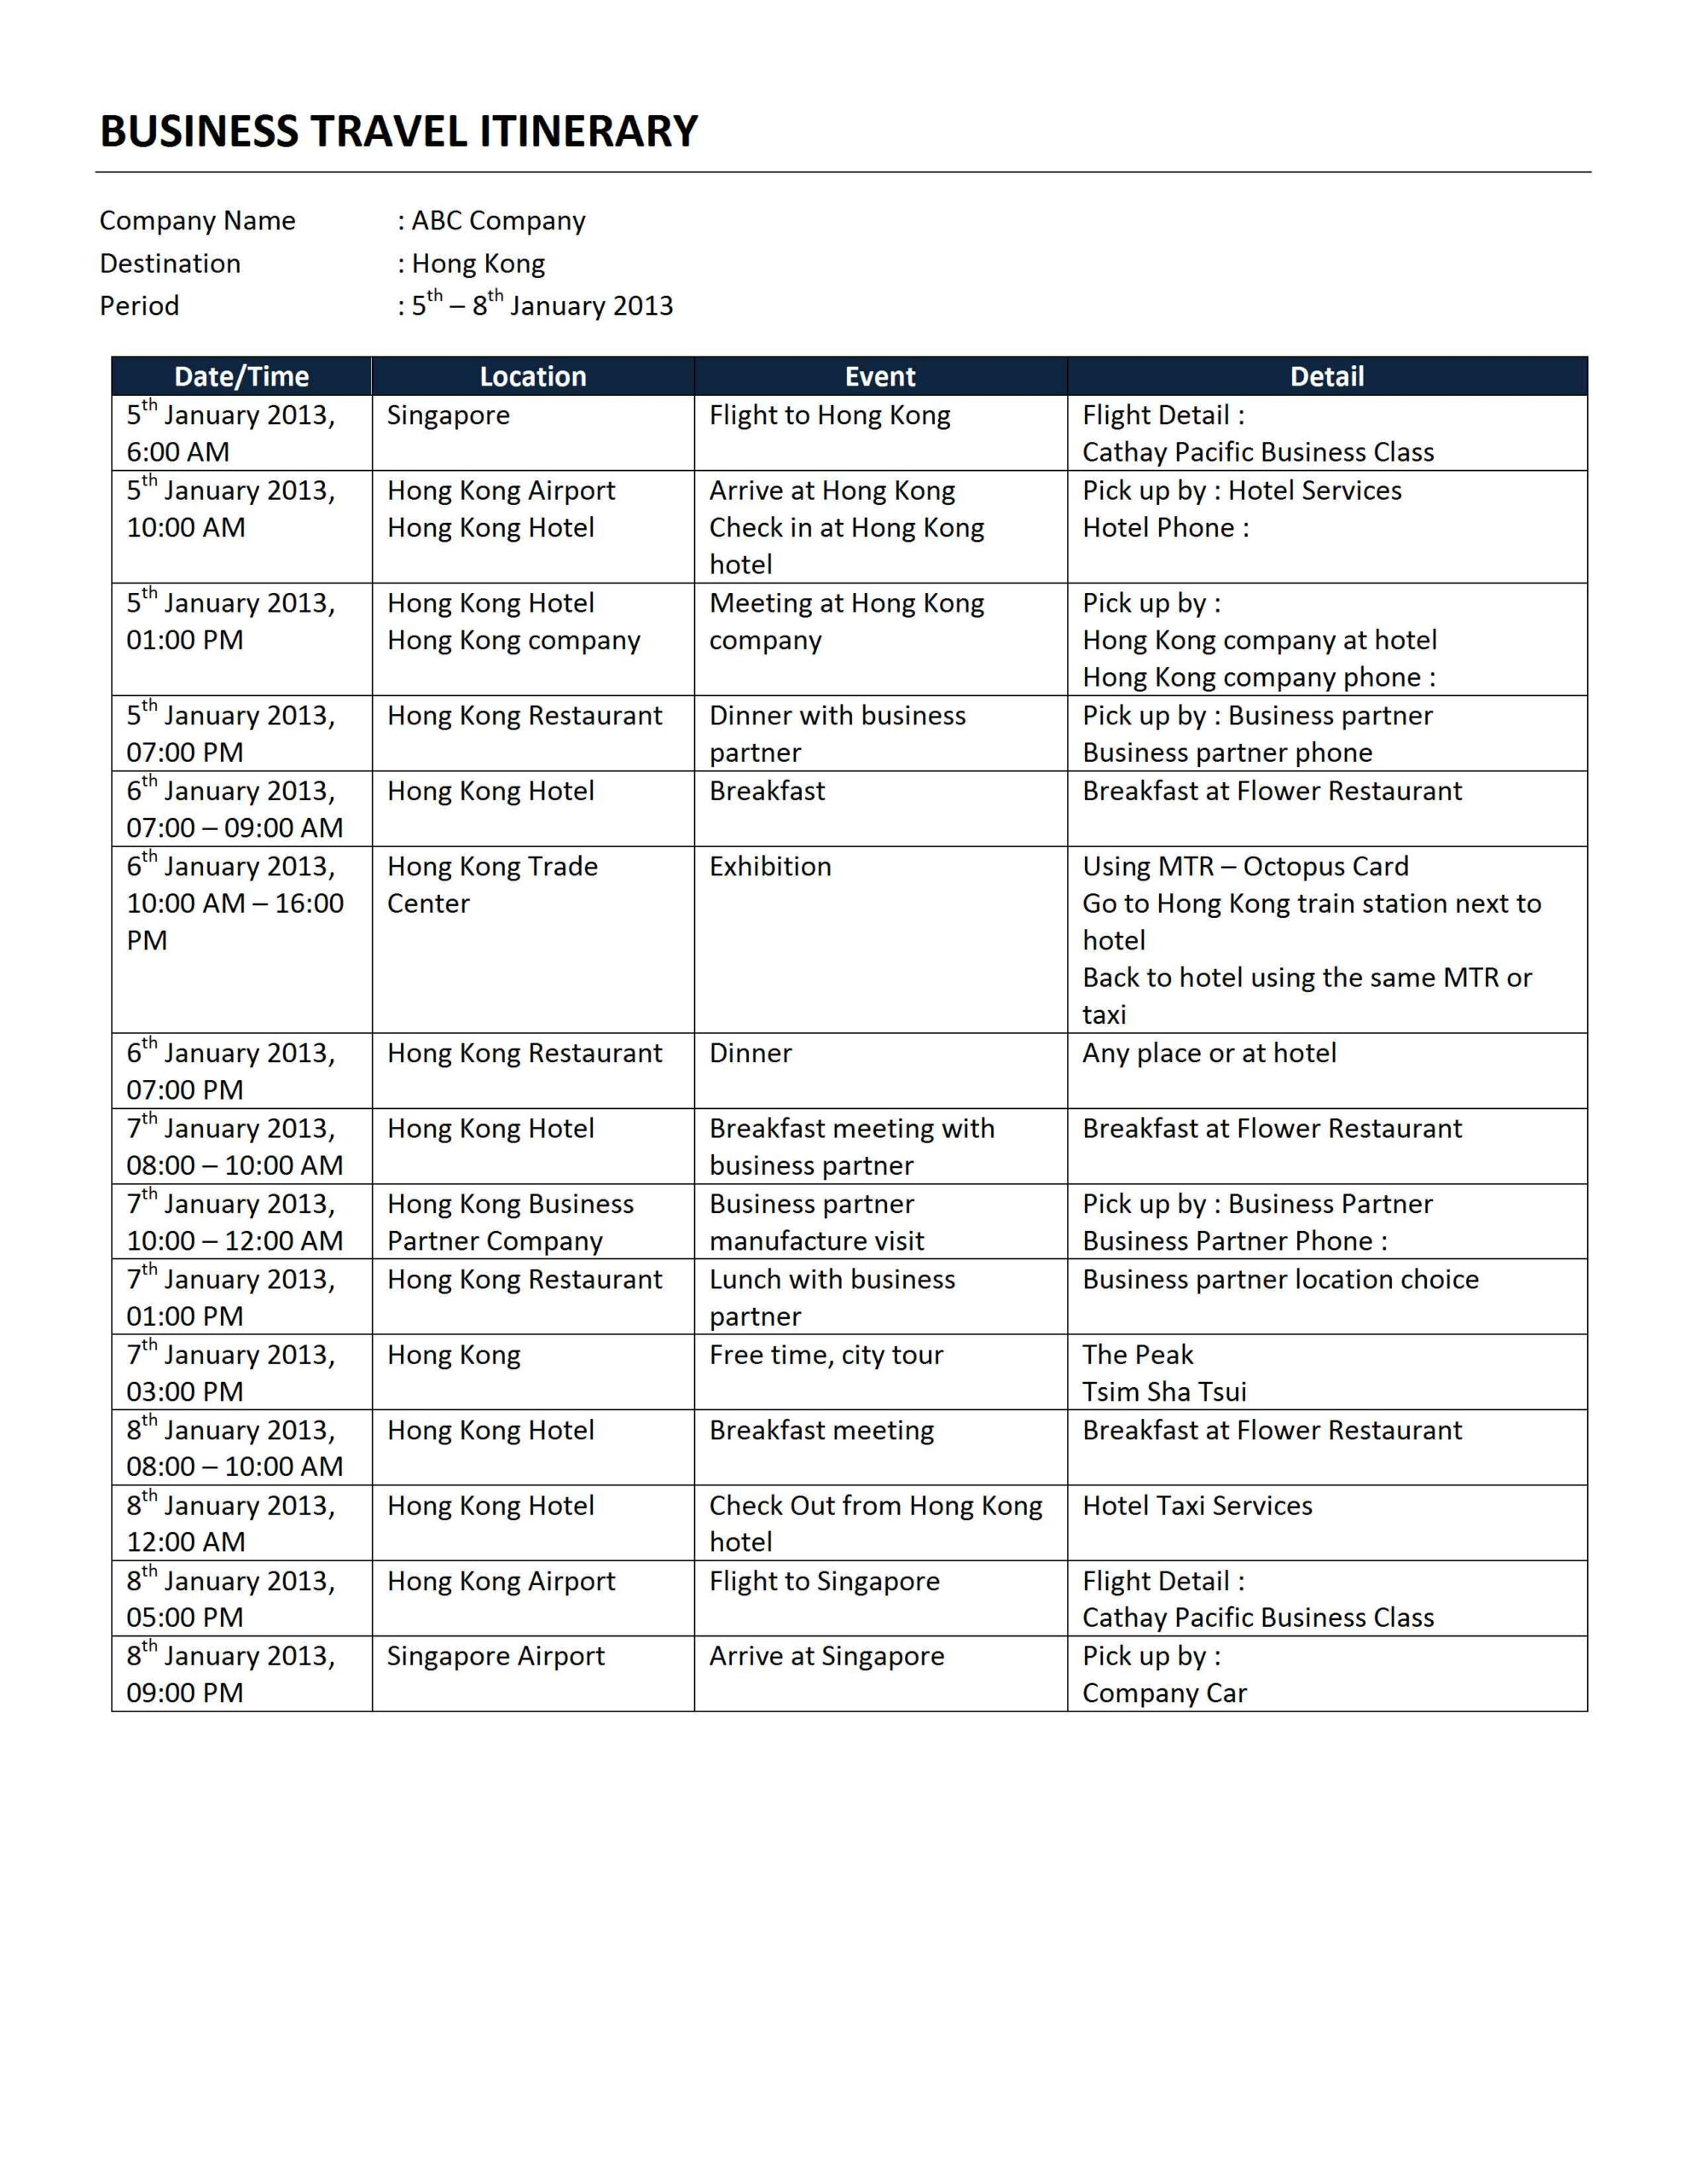 Business Travel Itinerary Template Inside Business Trip Travel Itinerary Template With Business Trip Travel Itinerary Template